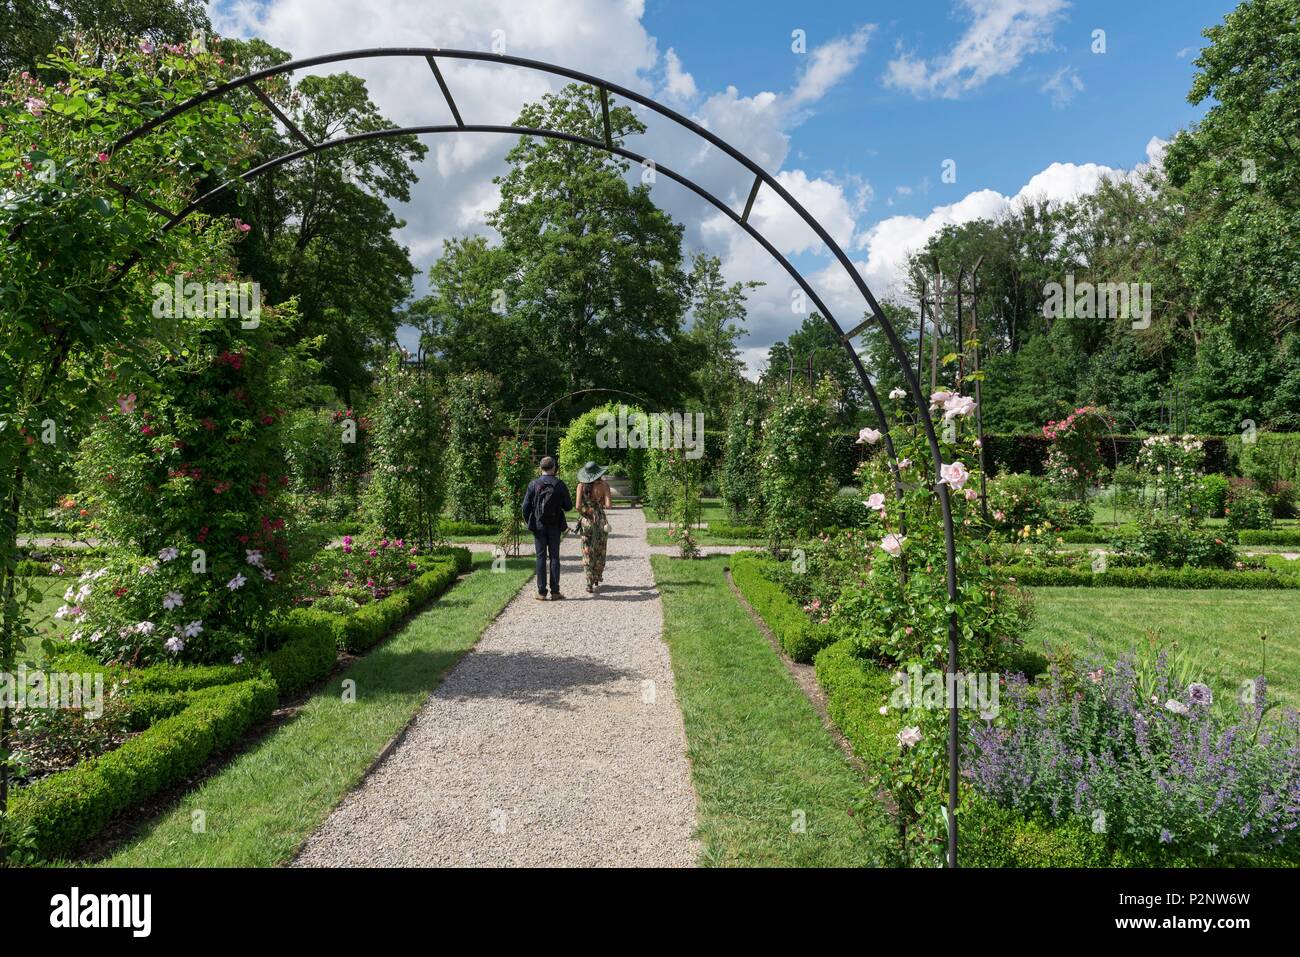 France, Oise, Fontaine Chaalis, Chaalis royal abbey, rose garden Stock Photo